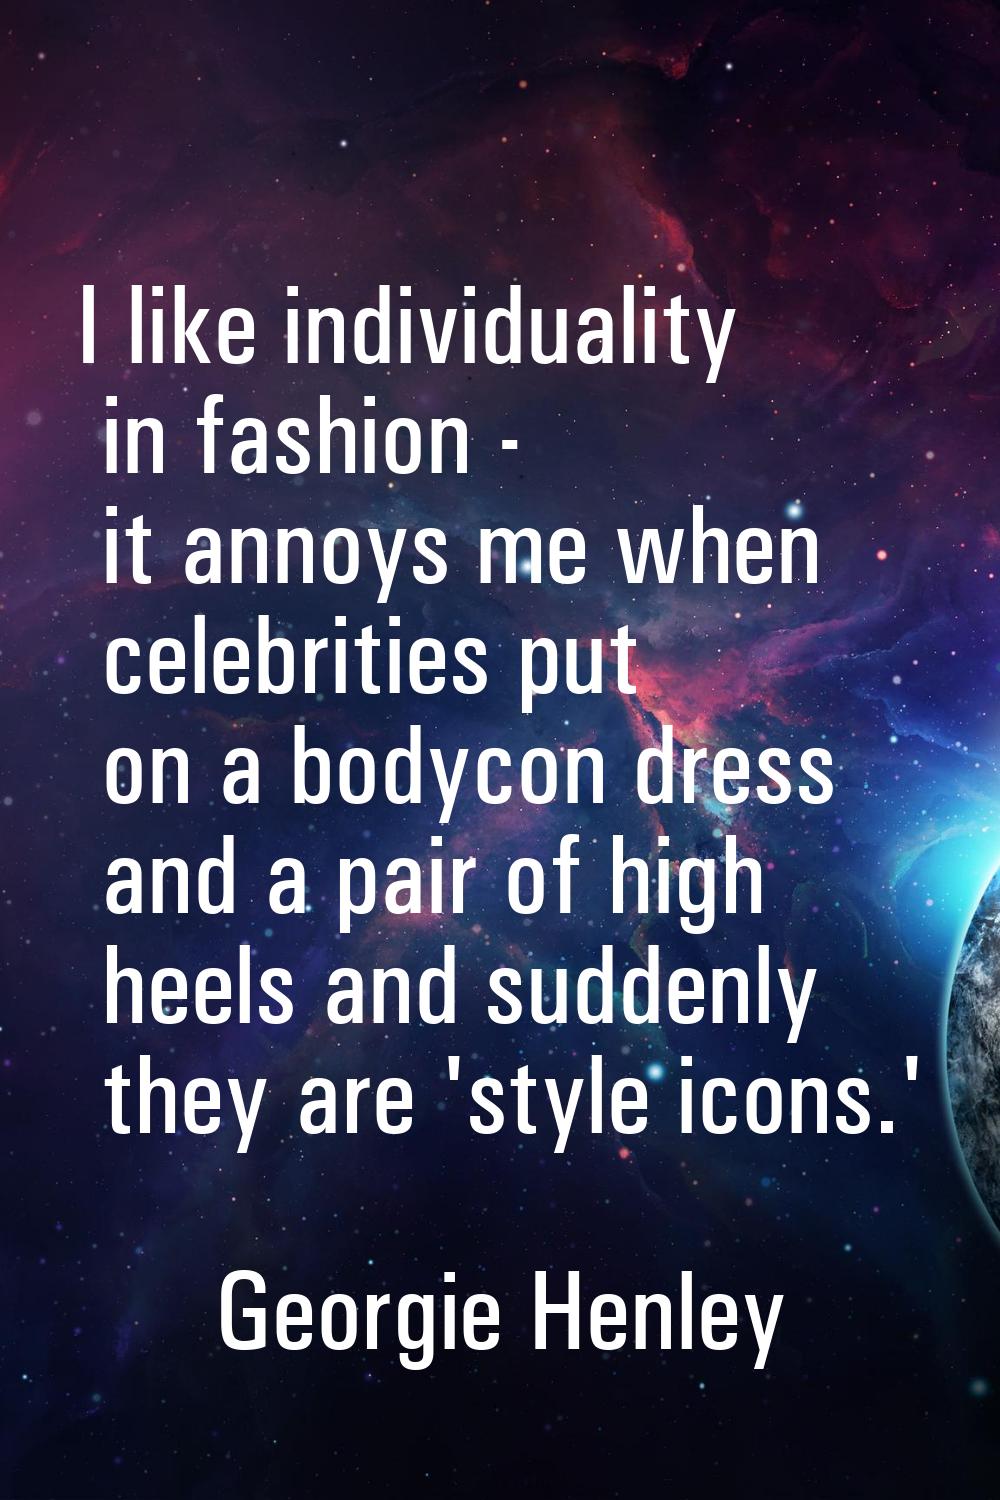 I like individuality in fashion - it annoys me when celebrities put on a bodycon dress and a pair o